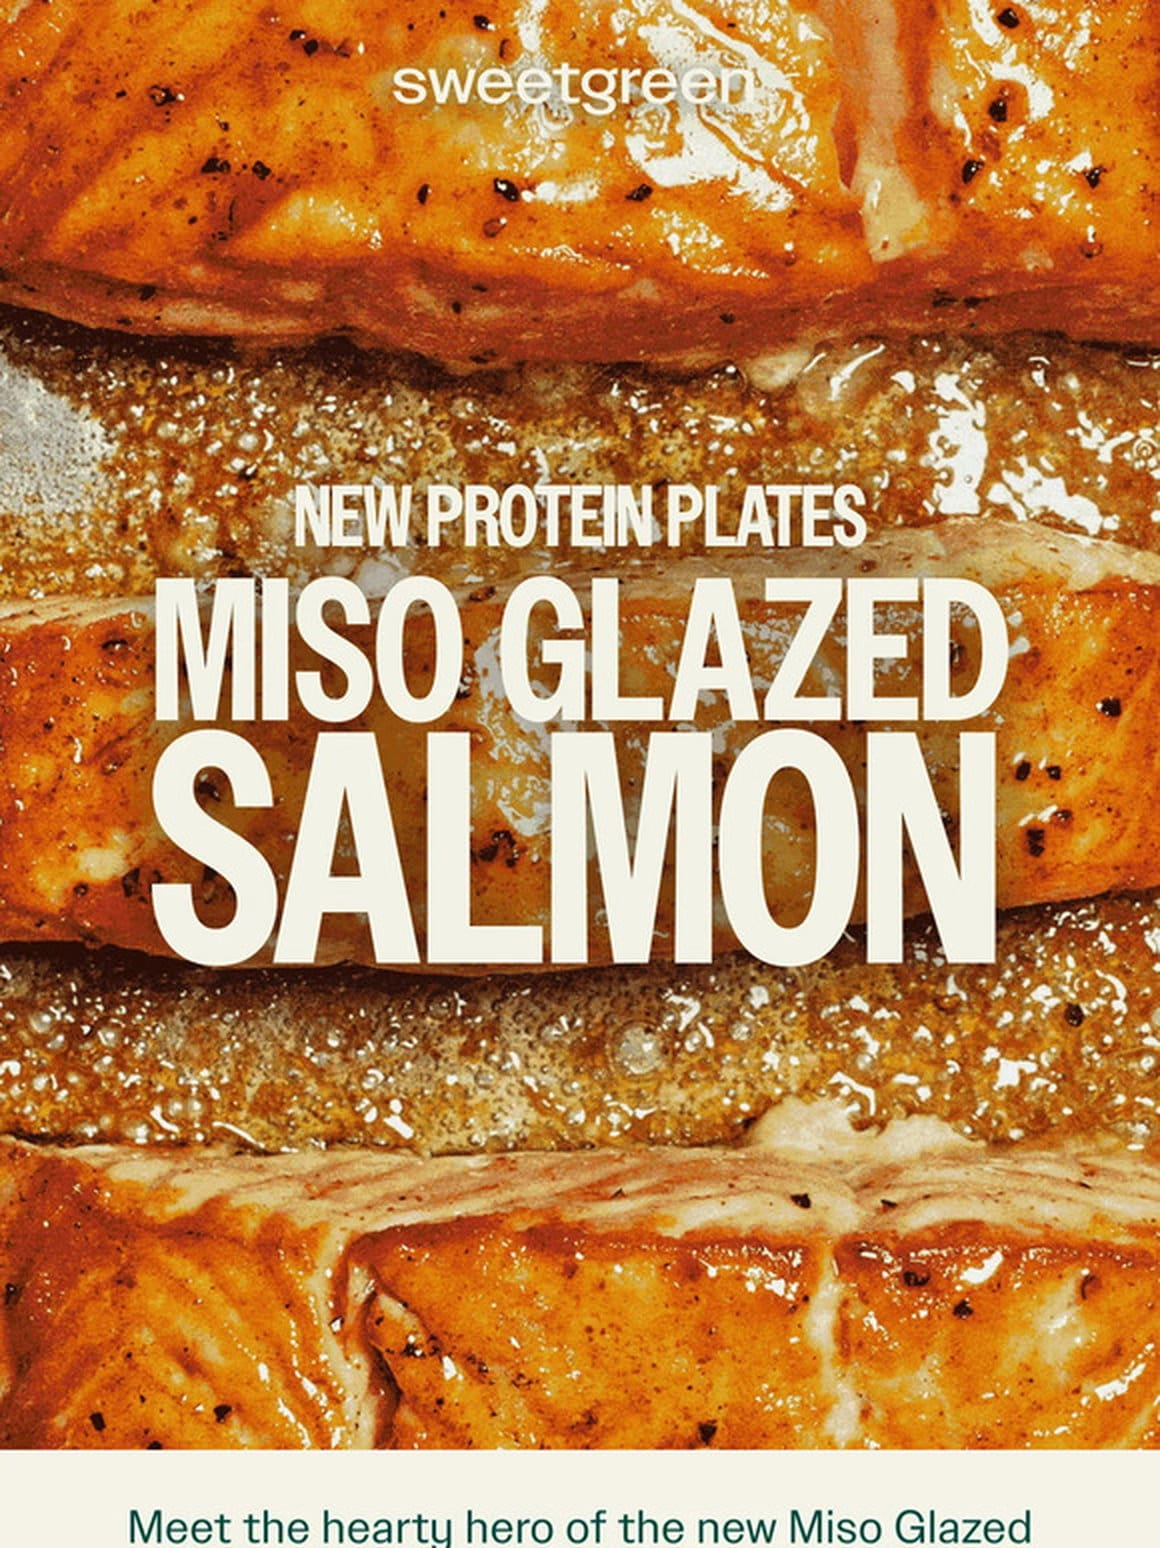 Meet the NEW protein plate